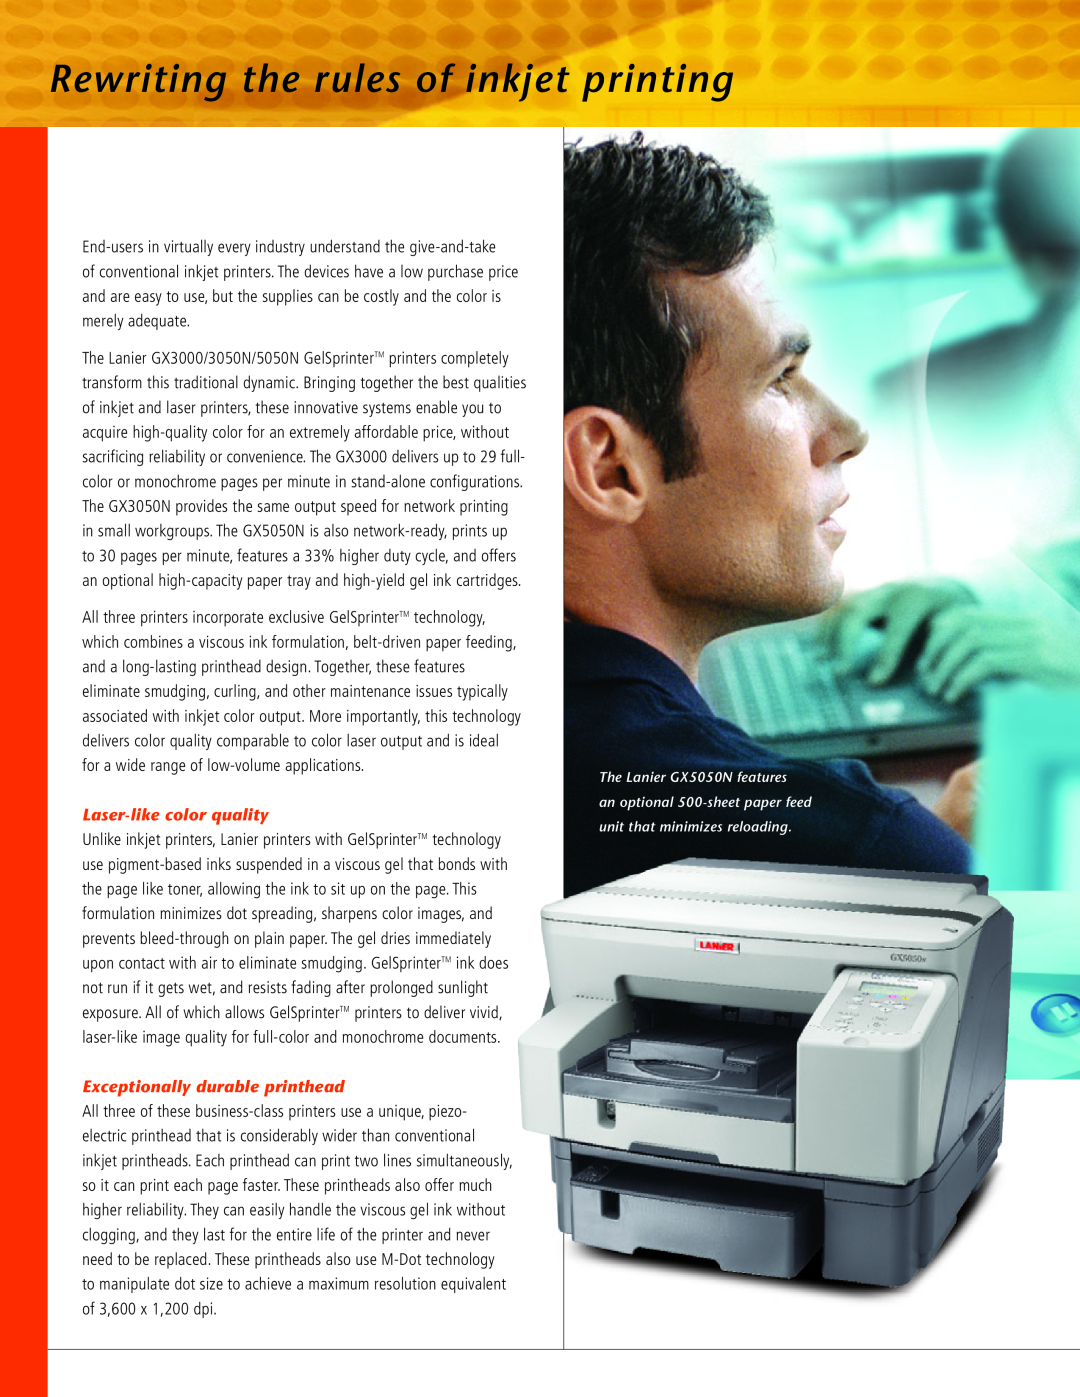 Lanier GX3050N, GX5050N Laser-likecolor quality, Exceptionally durable printhead, Rewriting the rules of inkjet printing 